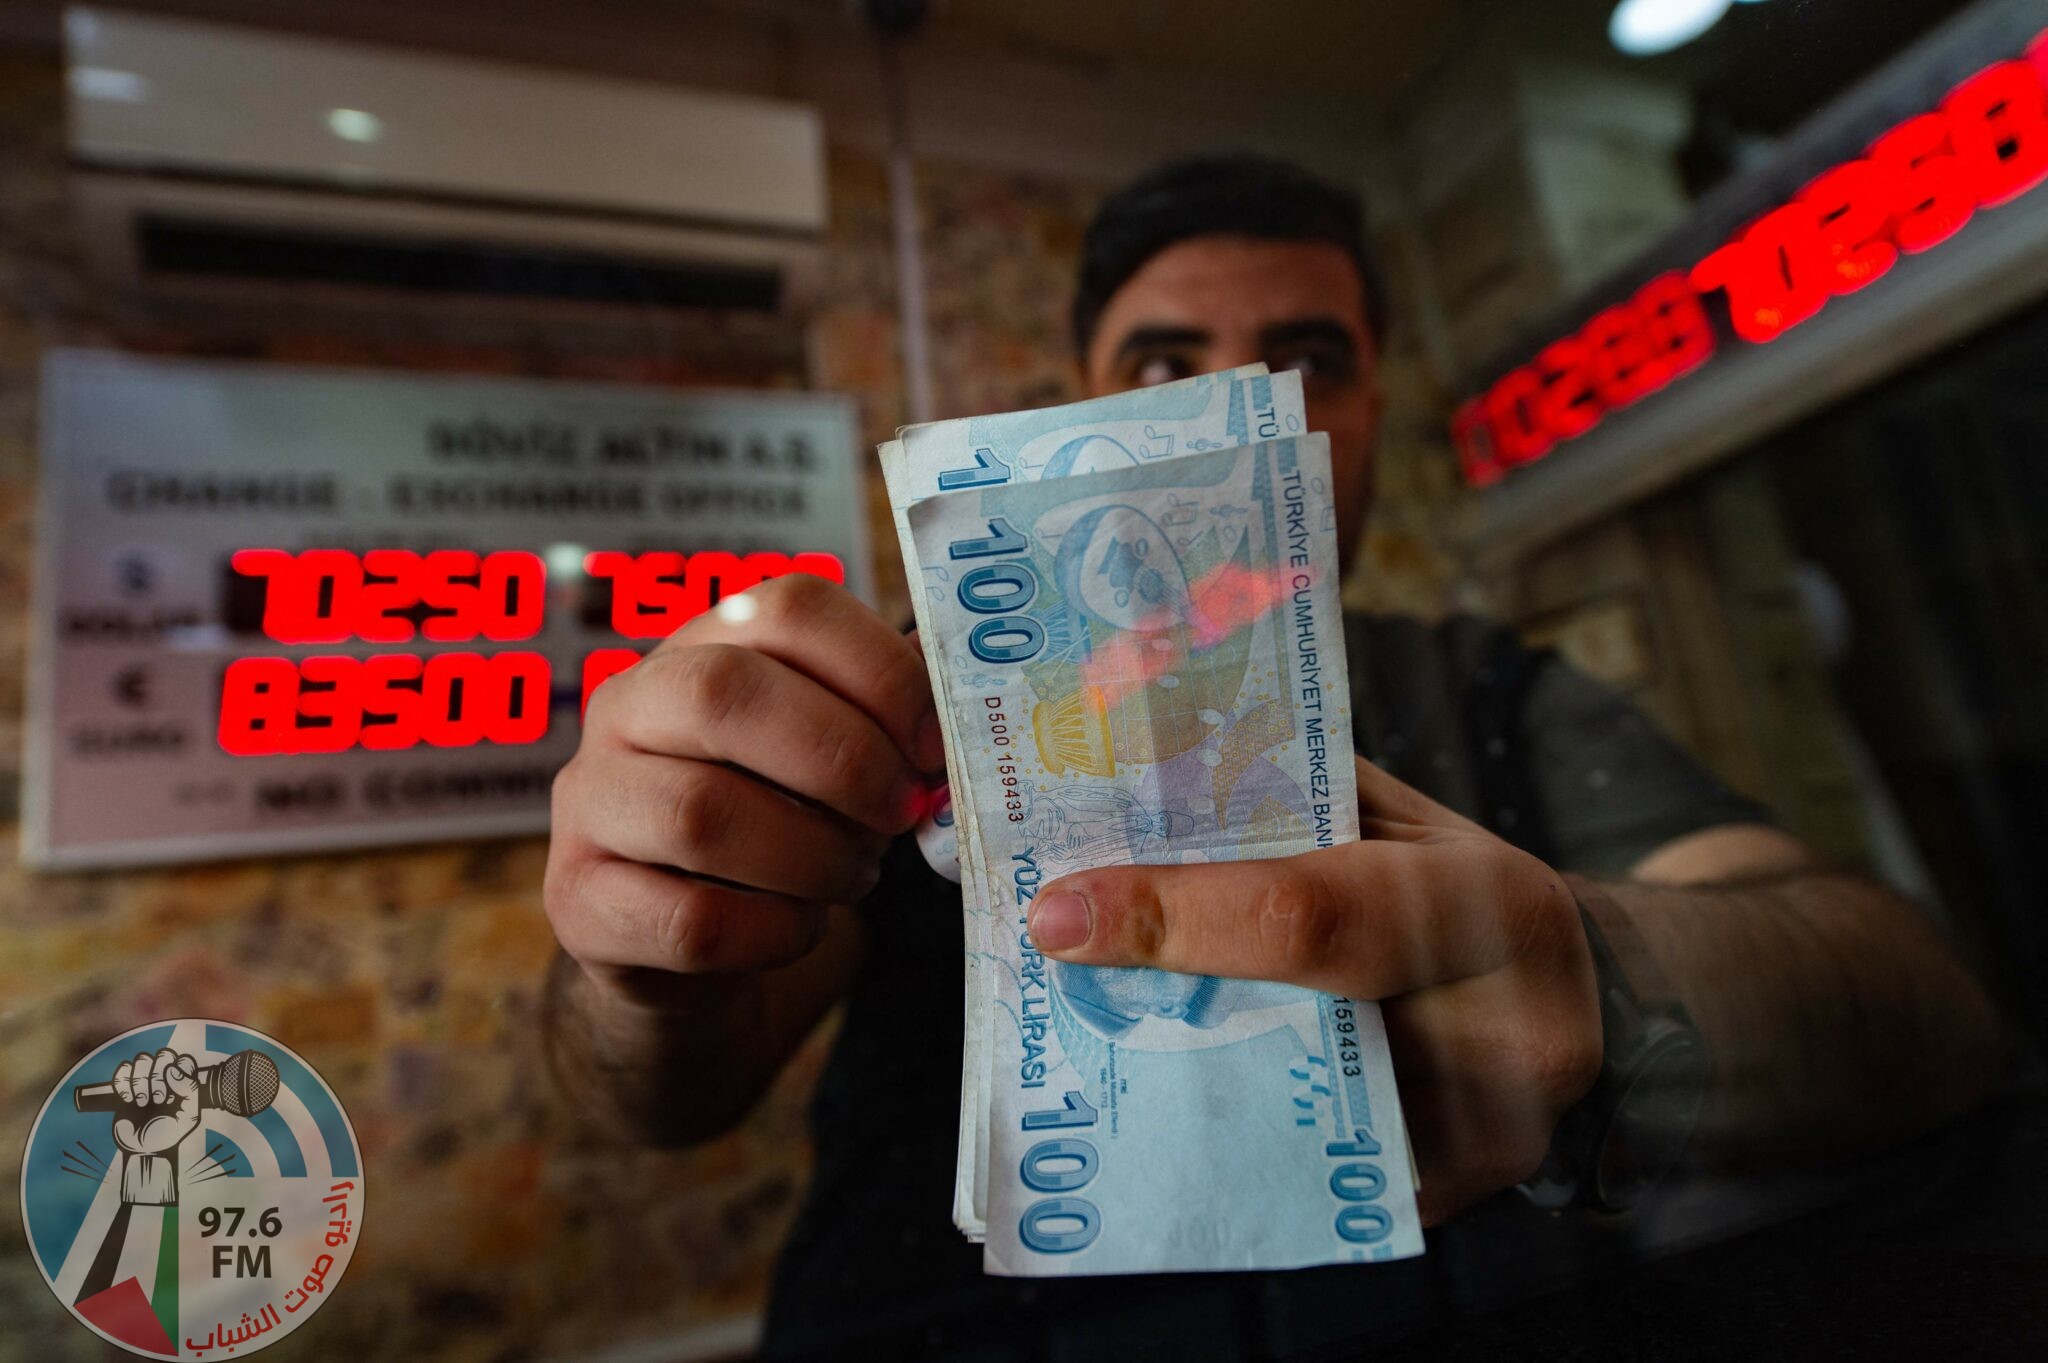 (FILES) In this file photo taken on August 6, 2020 a currency exchange office worker counts Turkish Lira banknotes in front of the electronic panel displaying currency exchange rates at an exchange office in Istanbul as Turkey's lira set a new record low against the US dollar. Turkey lira on November 23, 2021 has crashed 13% vs US dollar to new record low, AFP reports. (Photo by Yasin AKGUL / AFP)